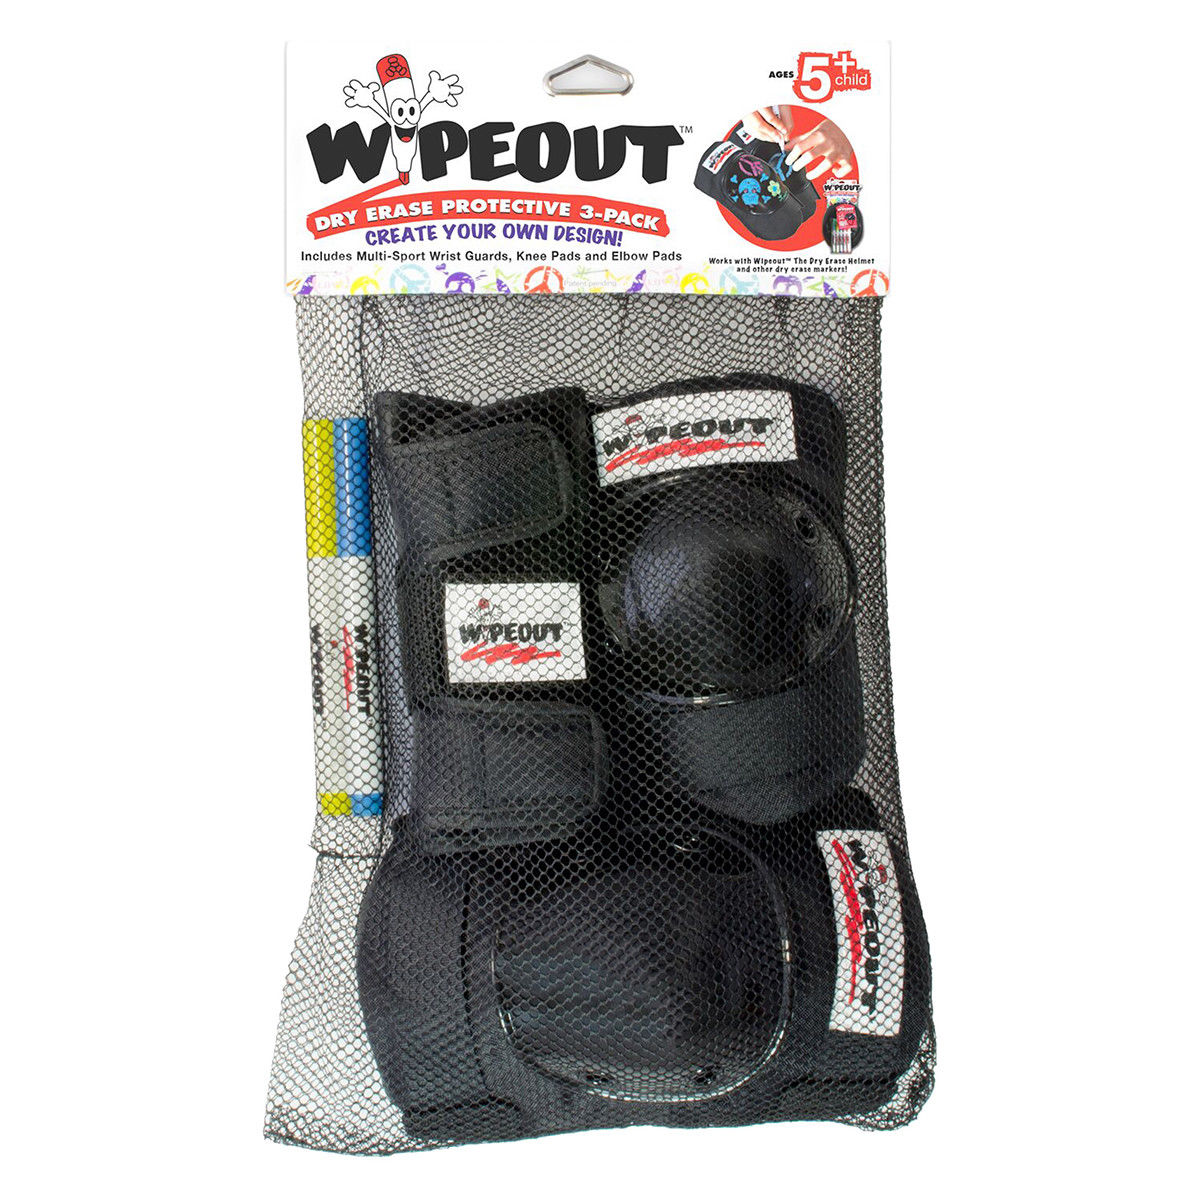 Wipeout Protective Pad Set - Wrist, Elbow, Knee - Youth Size - Black